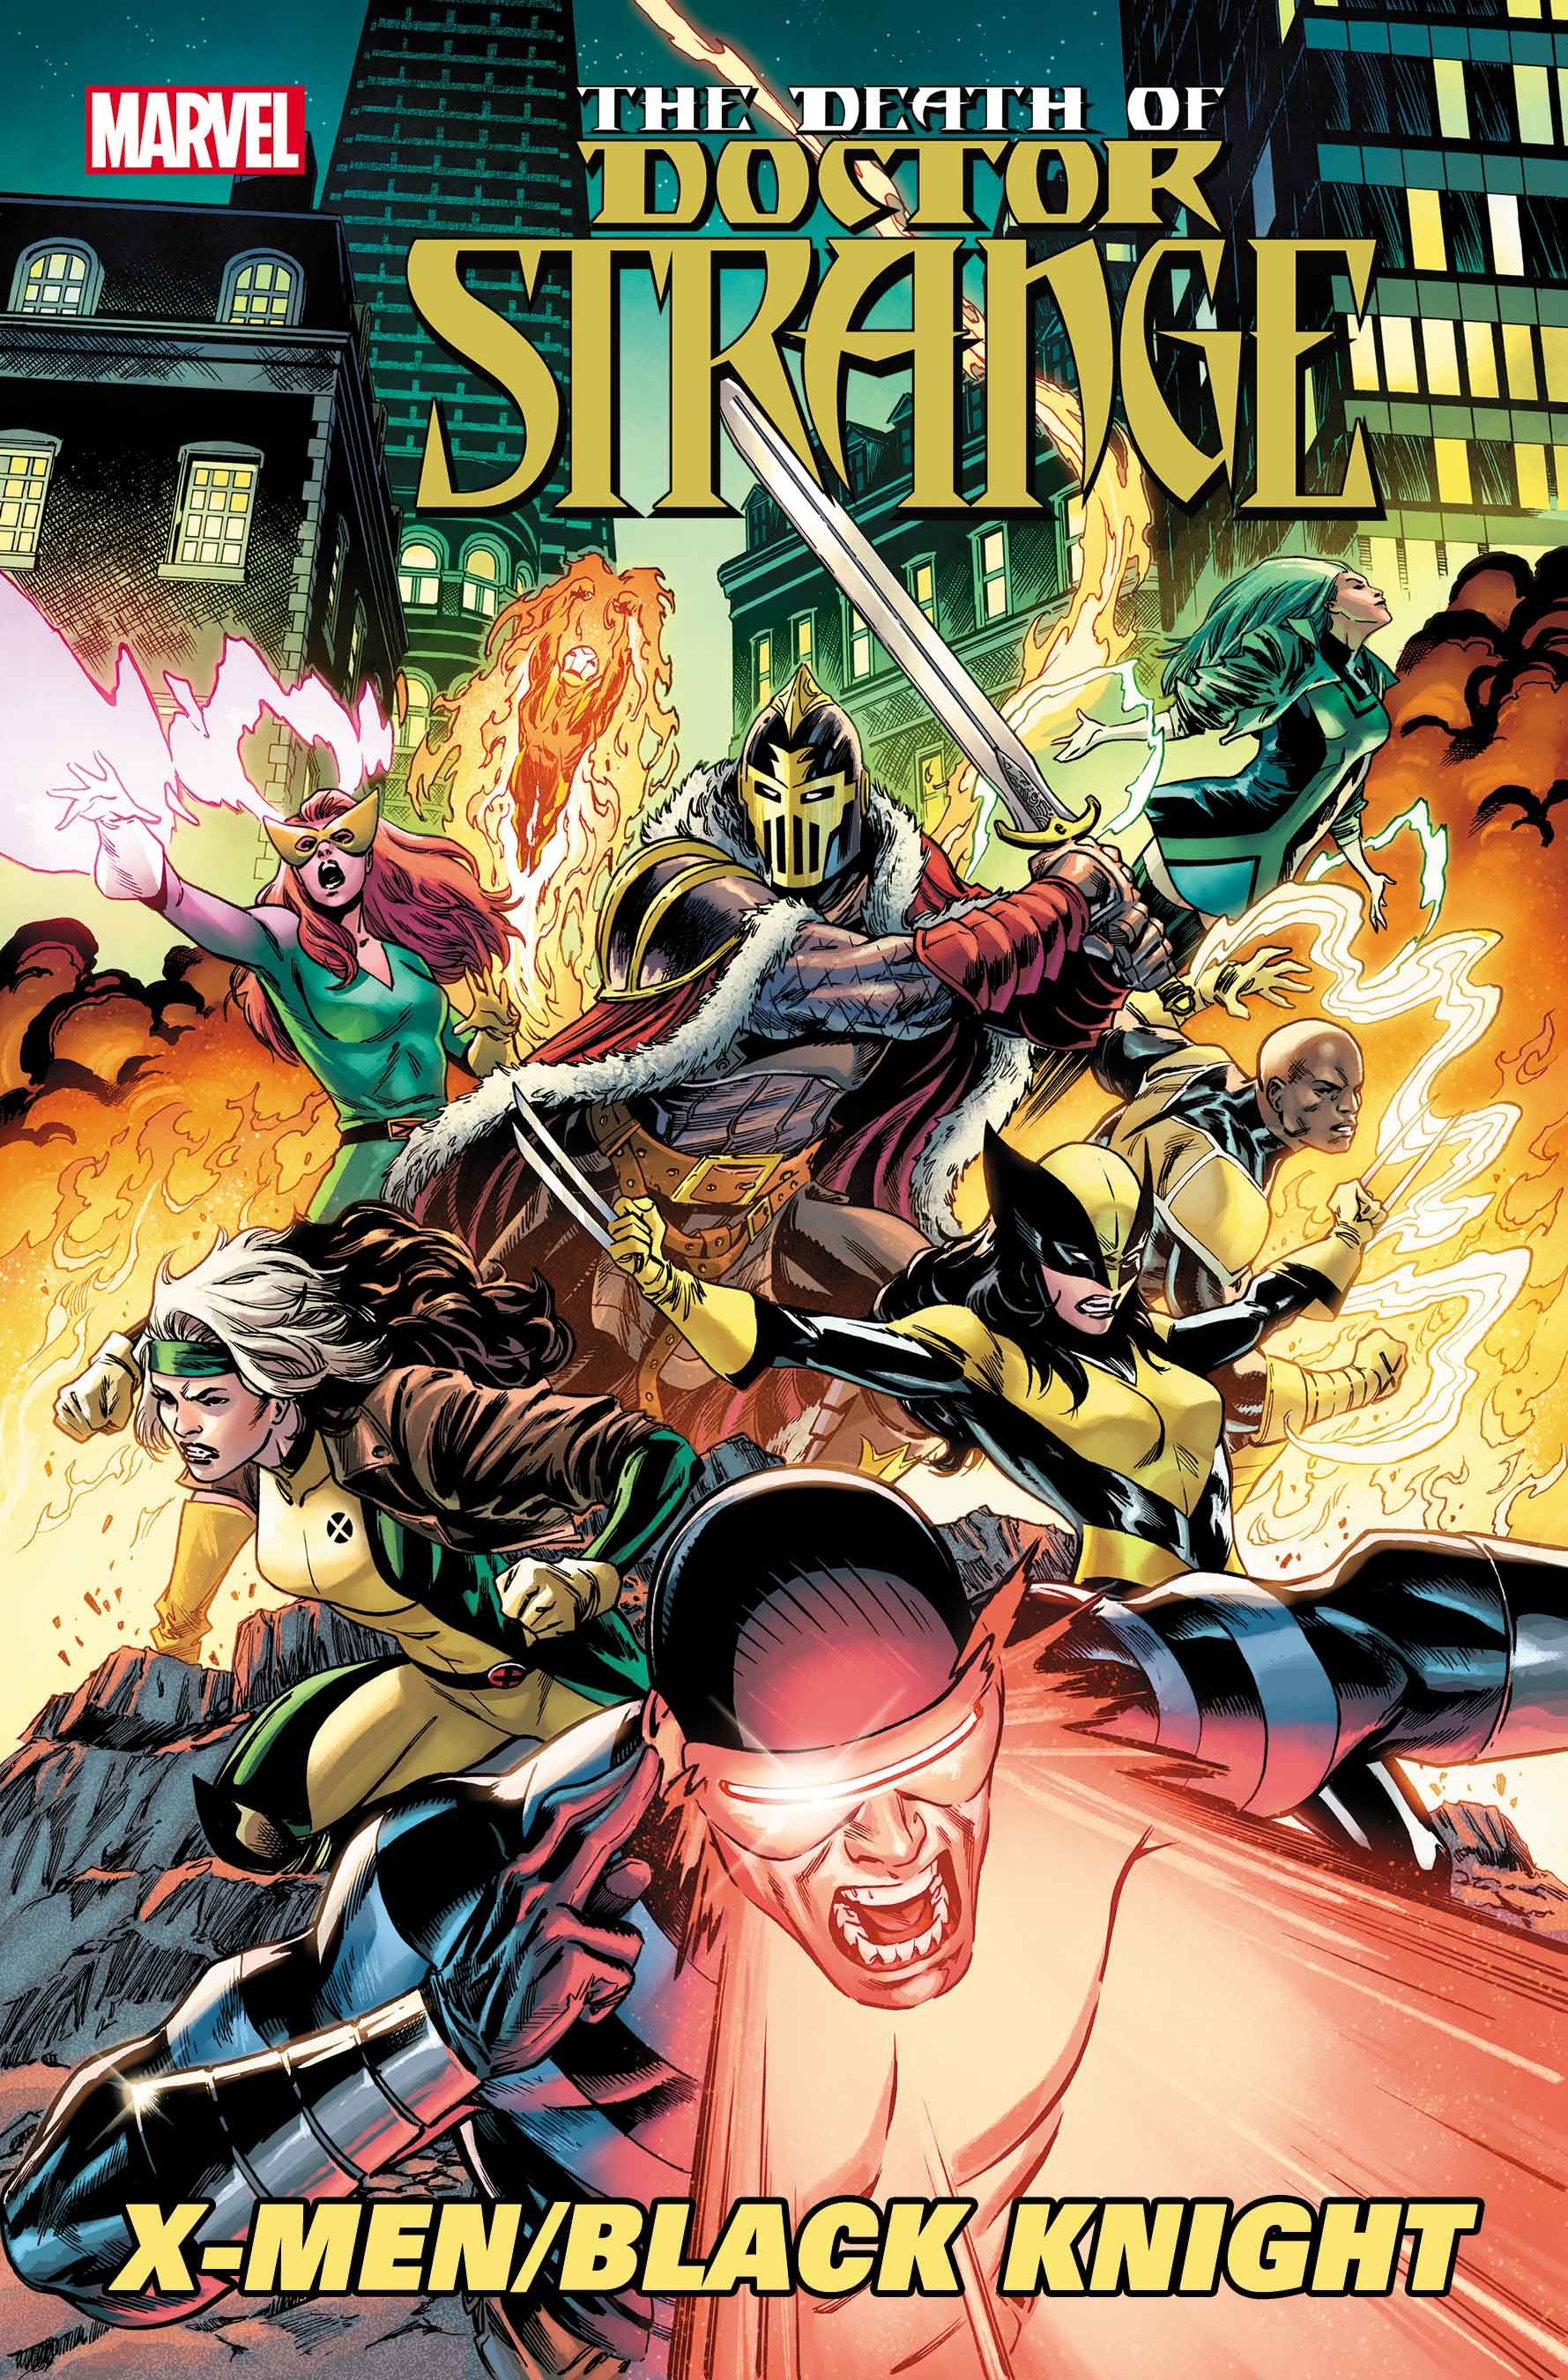 Cyclops leads the X-Men alongside Black Knight on the cover to Death of Doctor Strange X Men Black Knight 1 by Cory Smith